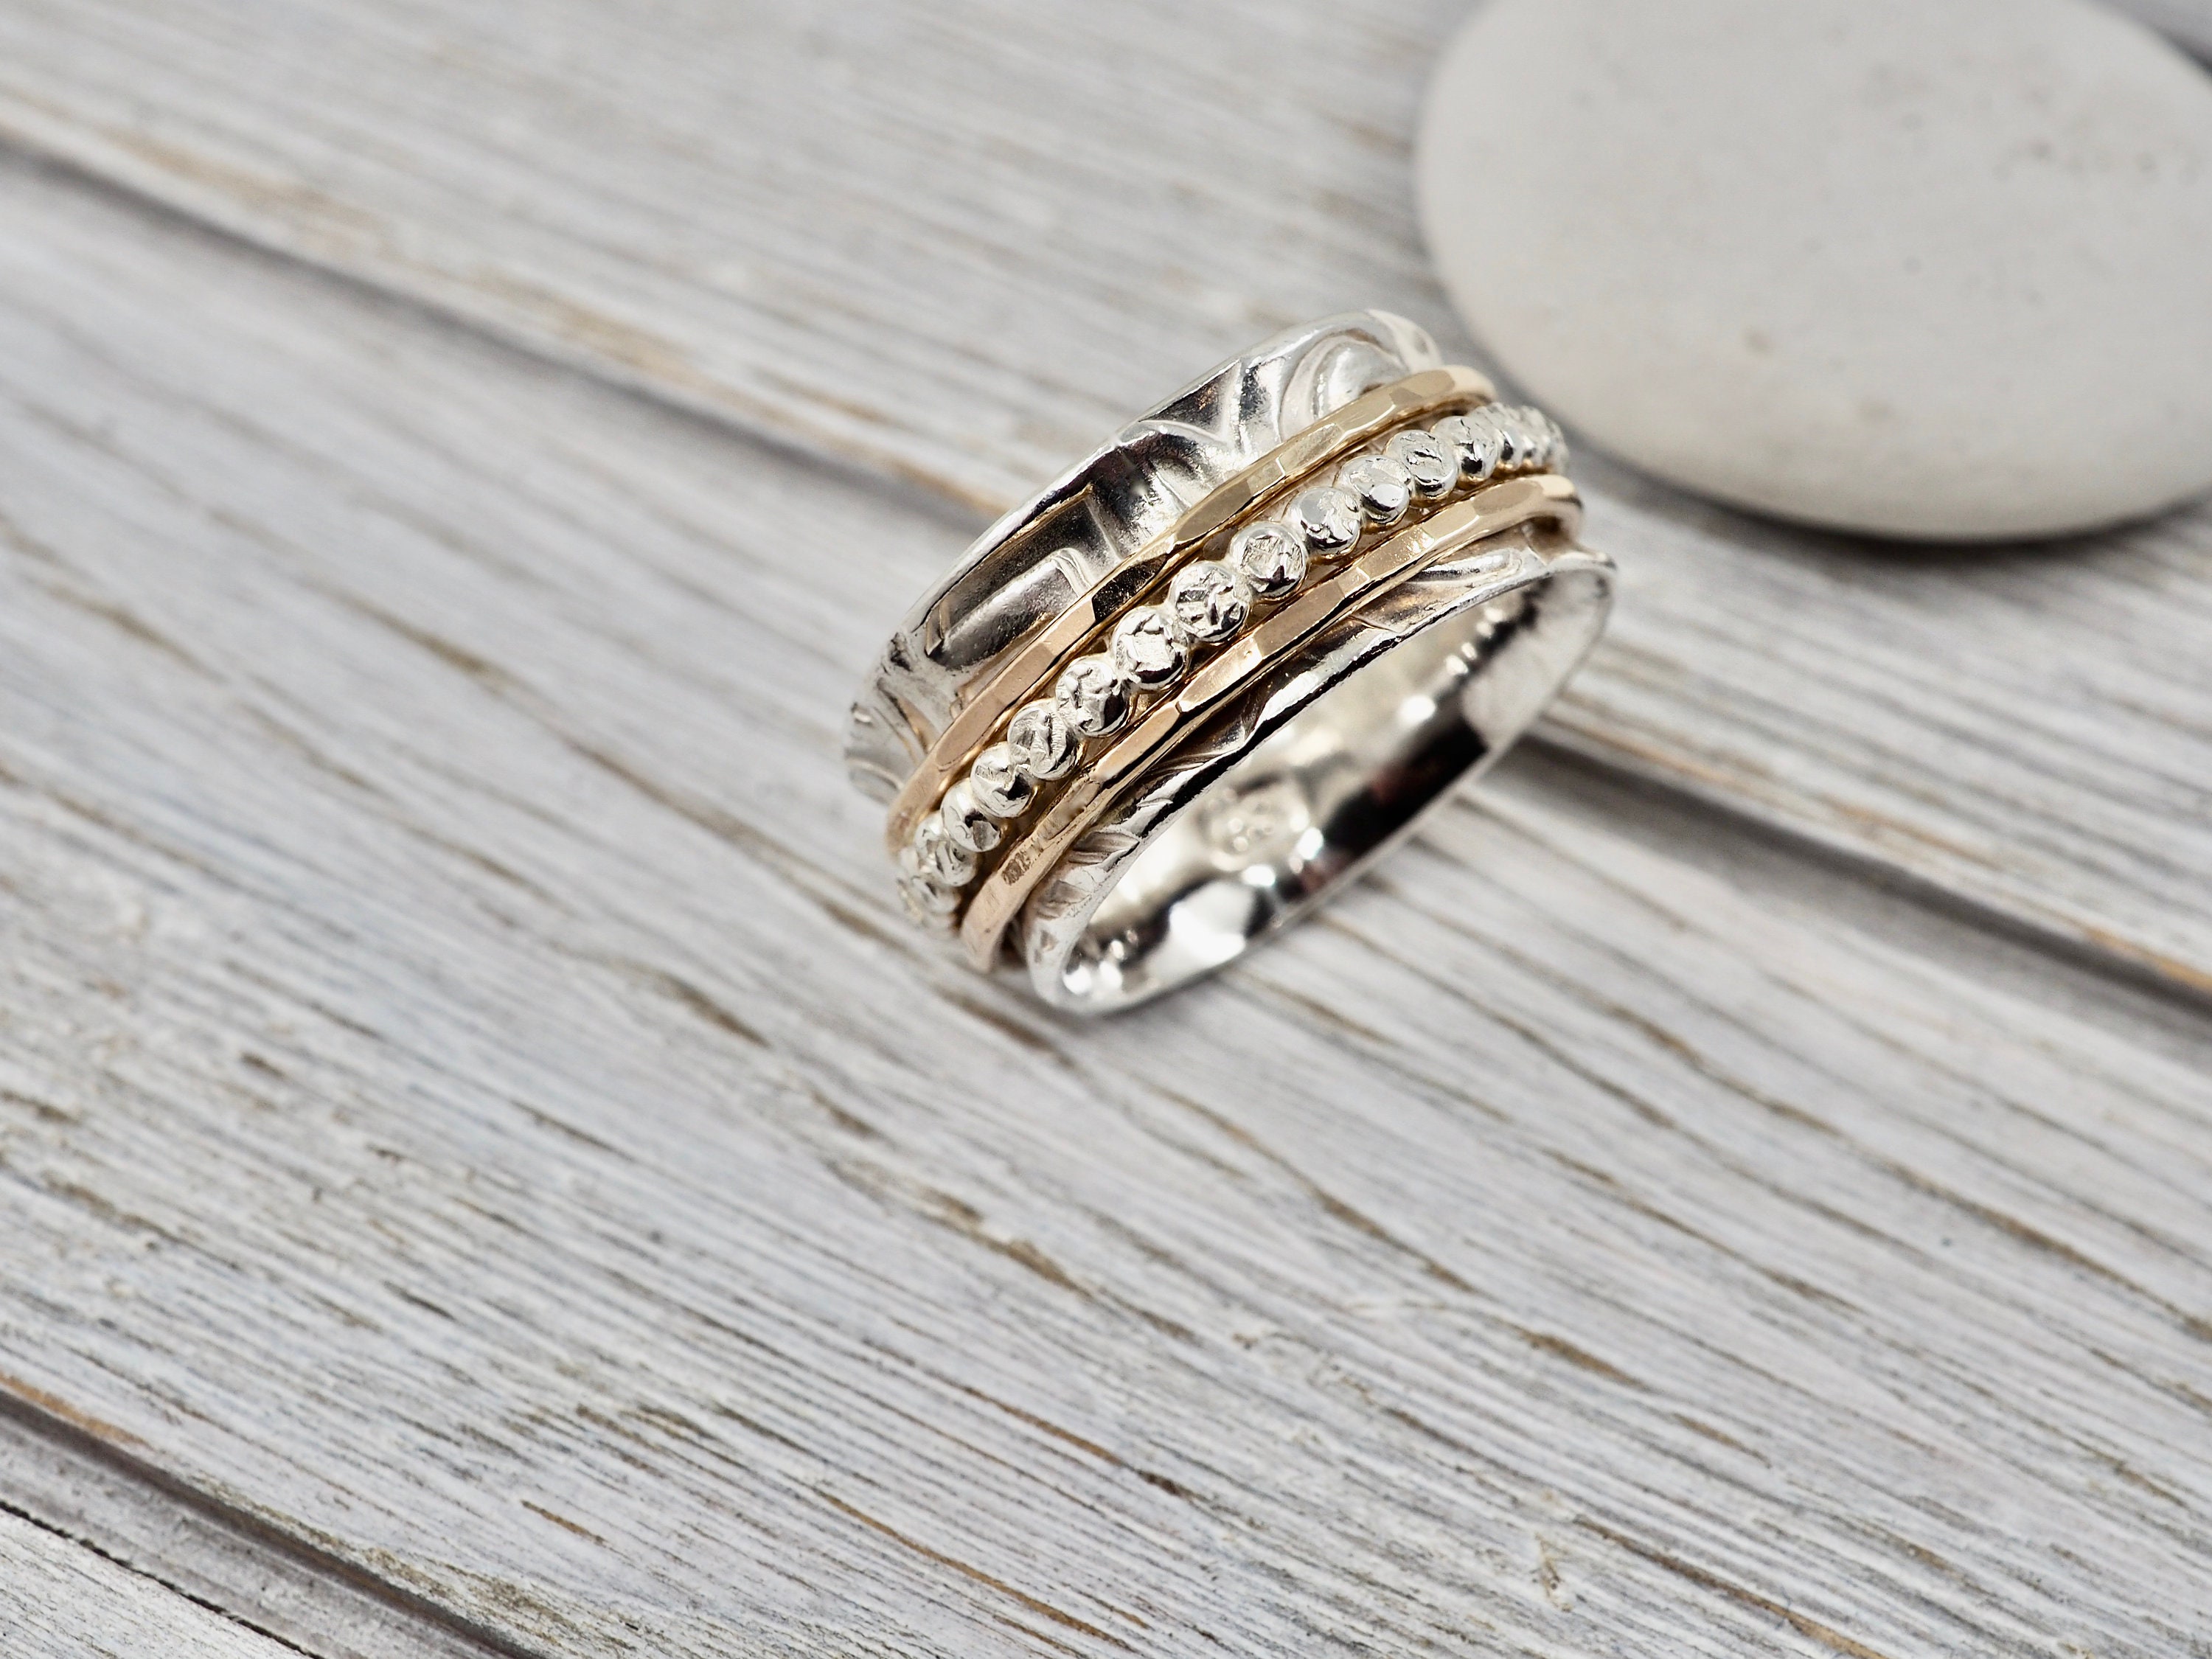 Spinner ring | Fidget ring | Anxiety ring | Sterling silver spinner ring Silver and gold ring | gift for her | Gift for wife